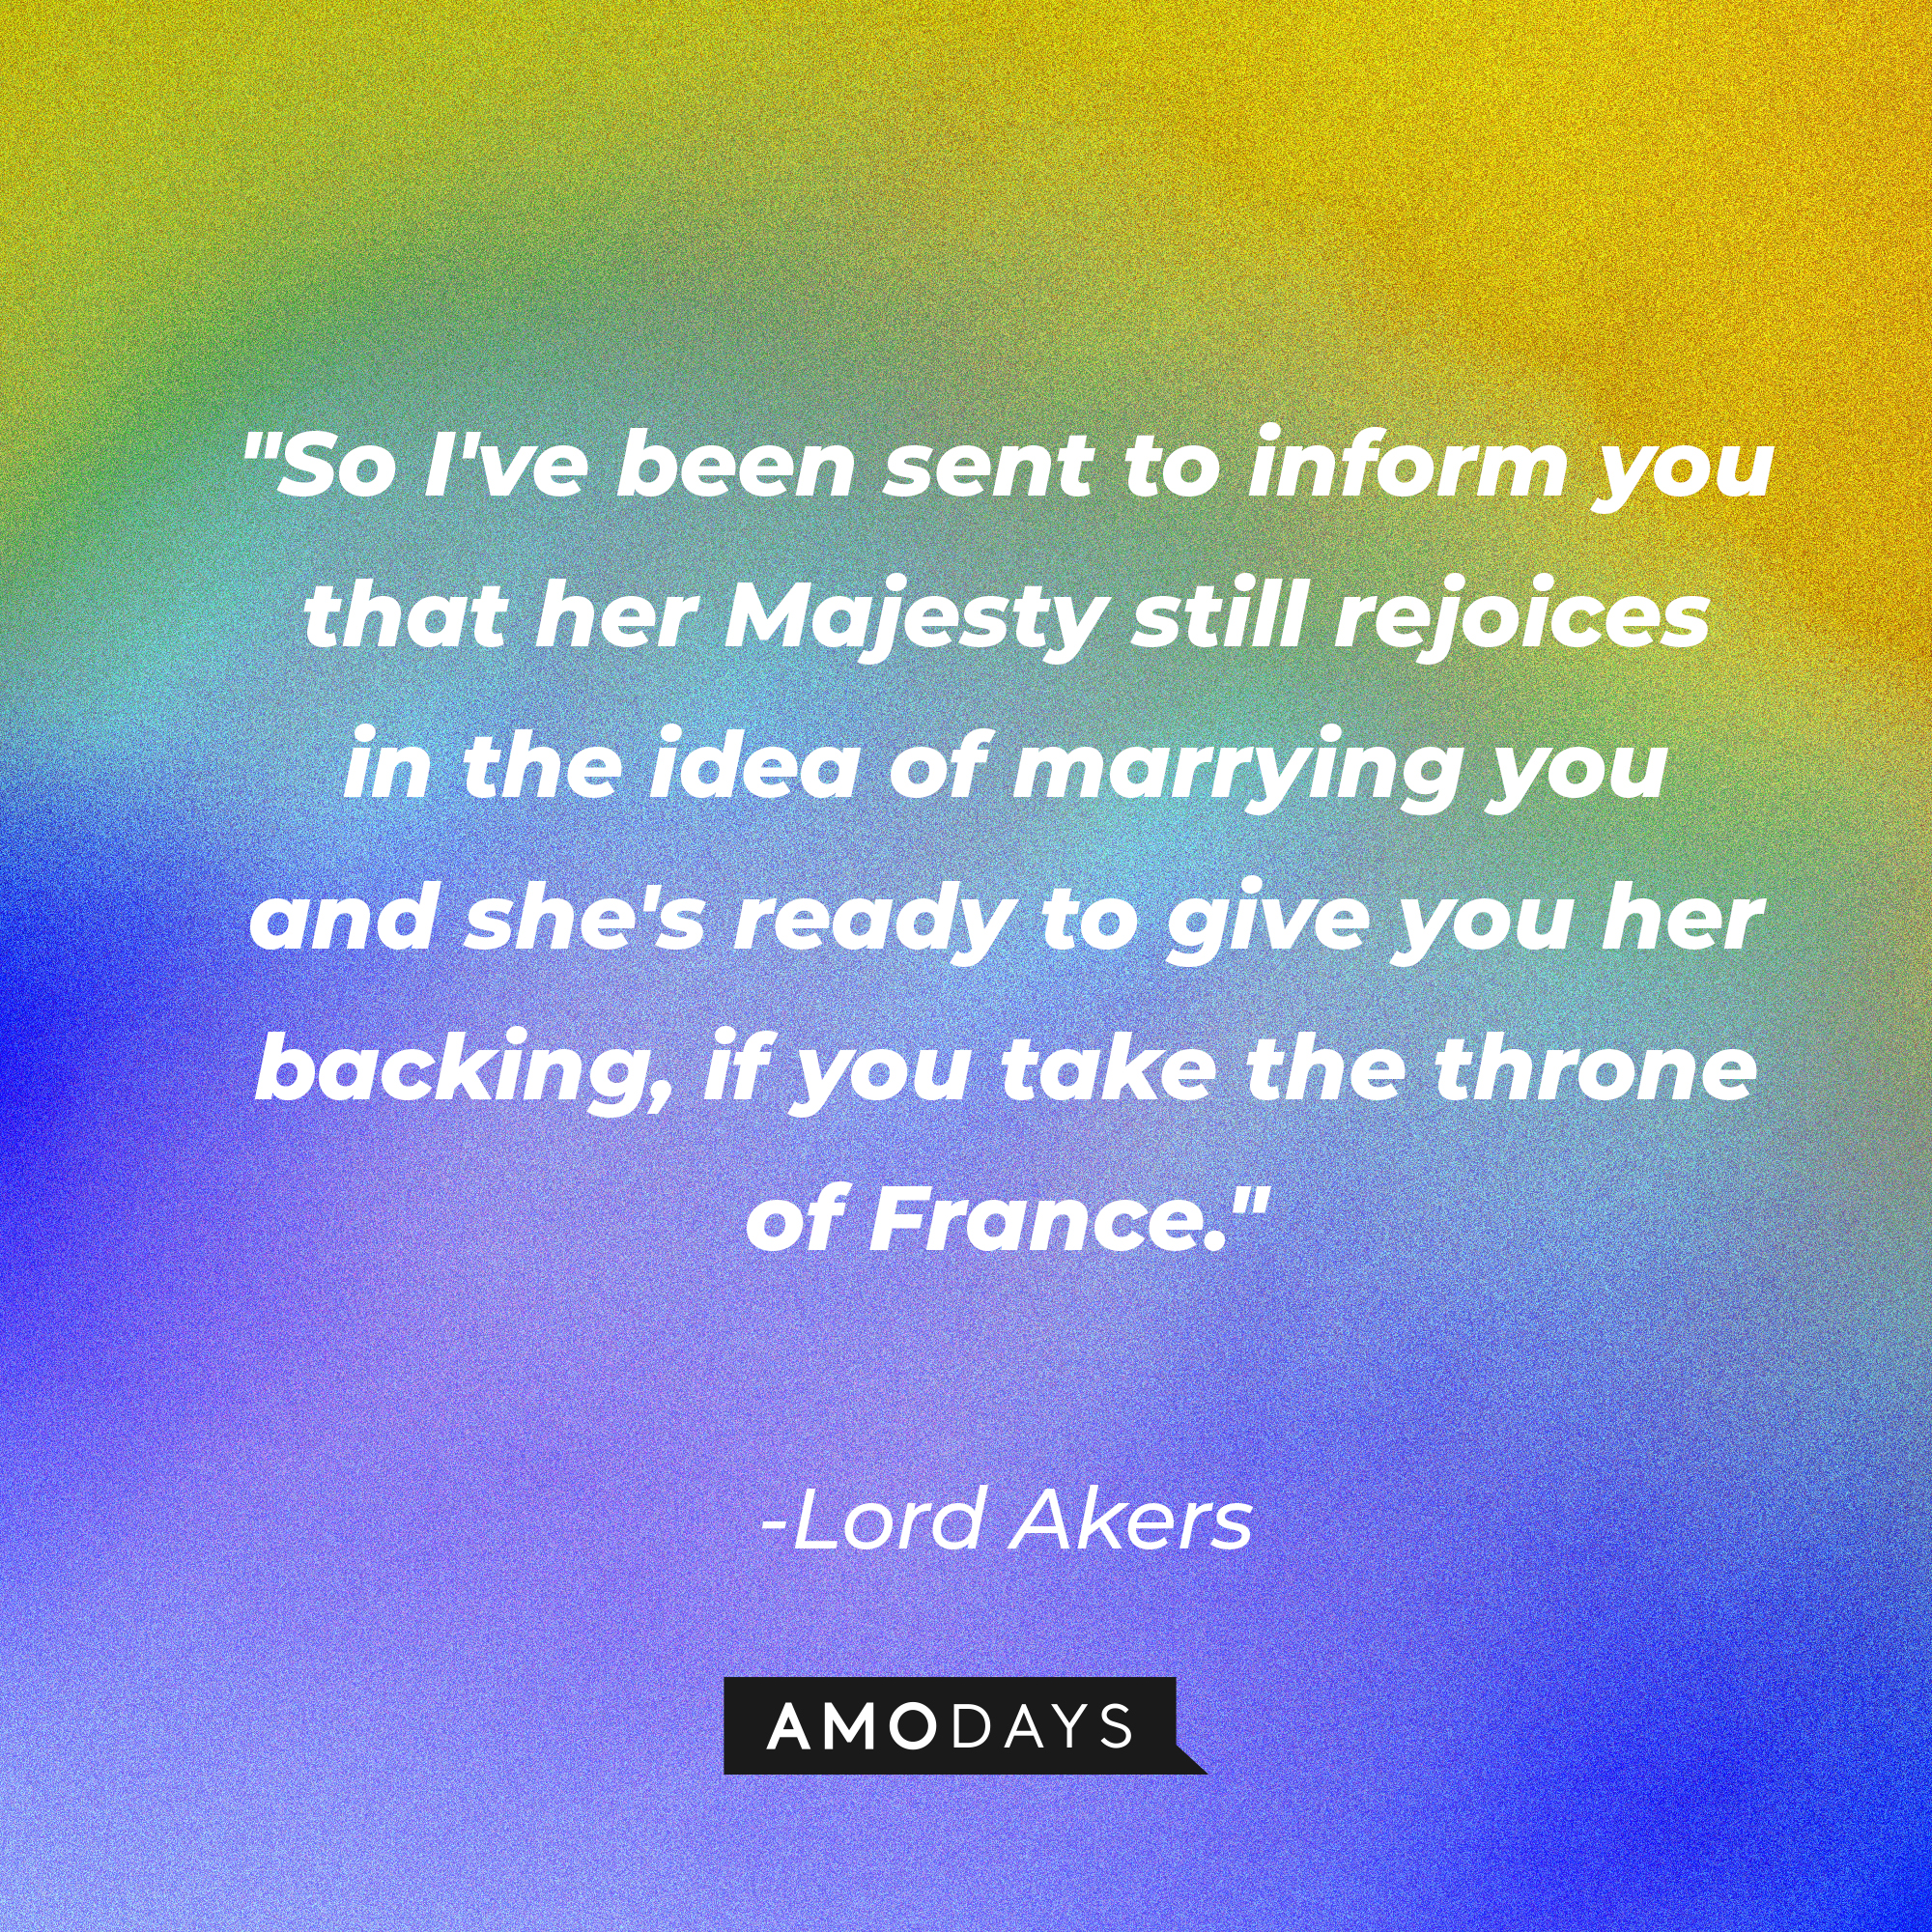 Lord Akers' quote in "Reign:" "So I've been sent to inform you that her Majesty still rejoices in the idea of marrying you and she's ready to give you her backing, if you take the throne of France." | Source: Amodays